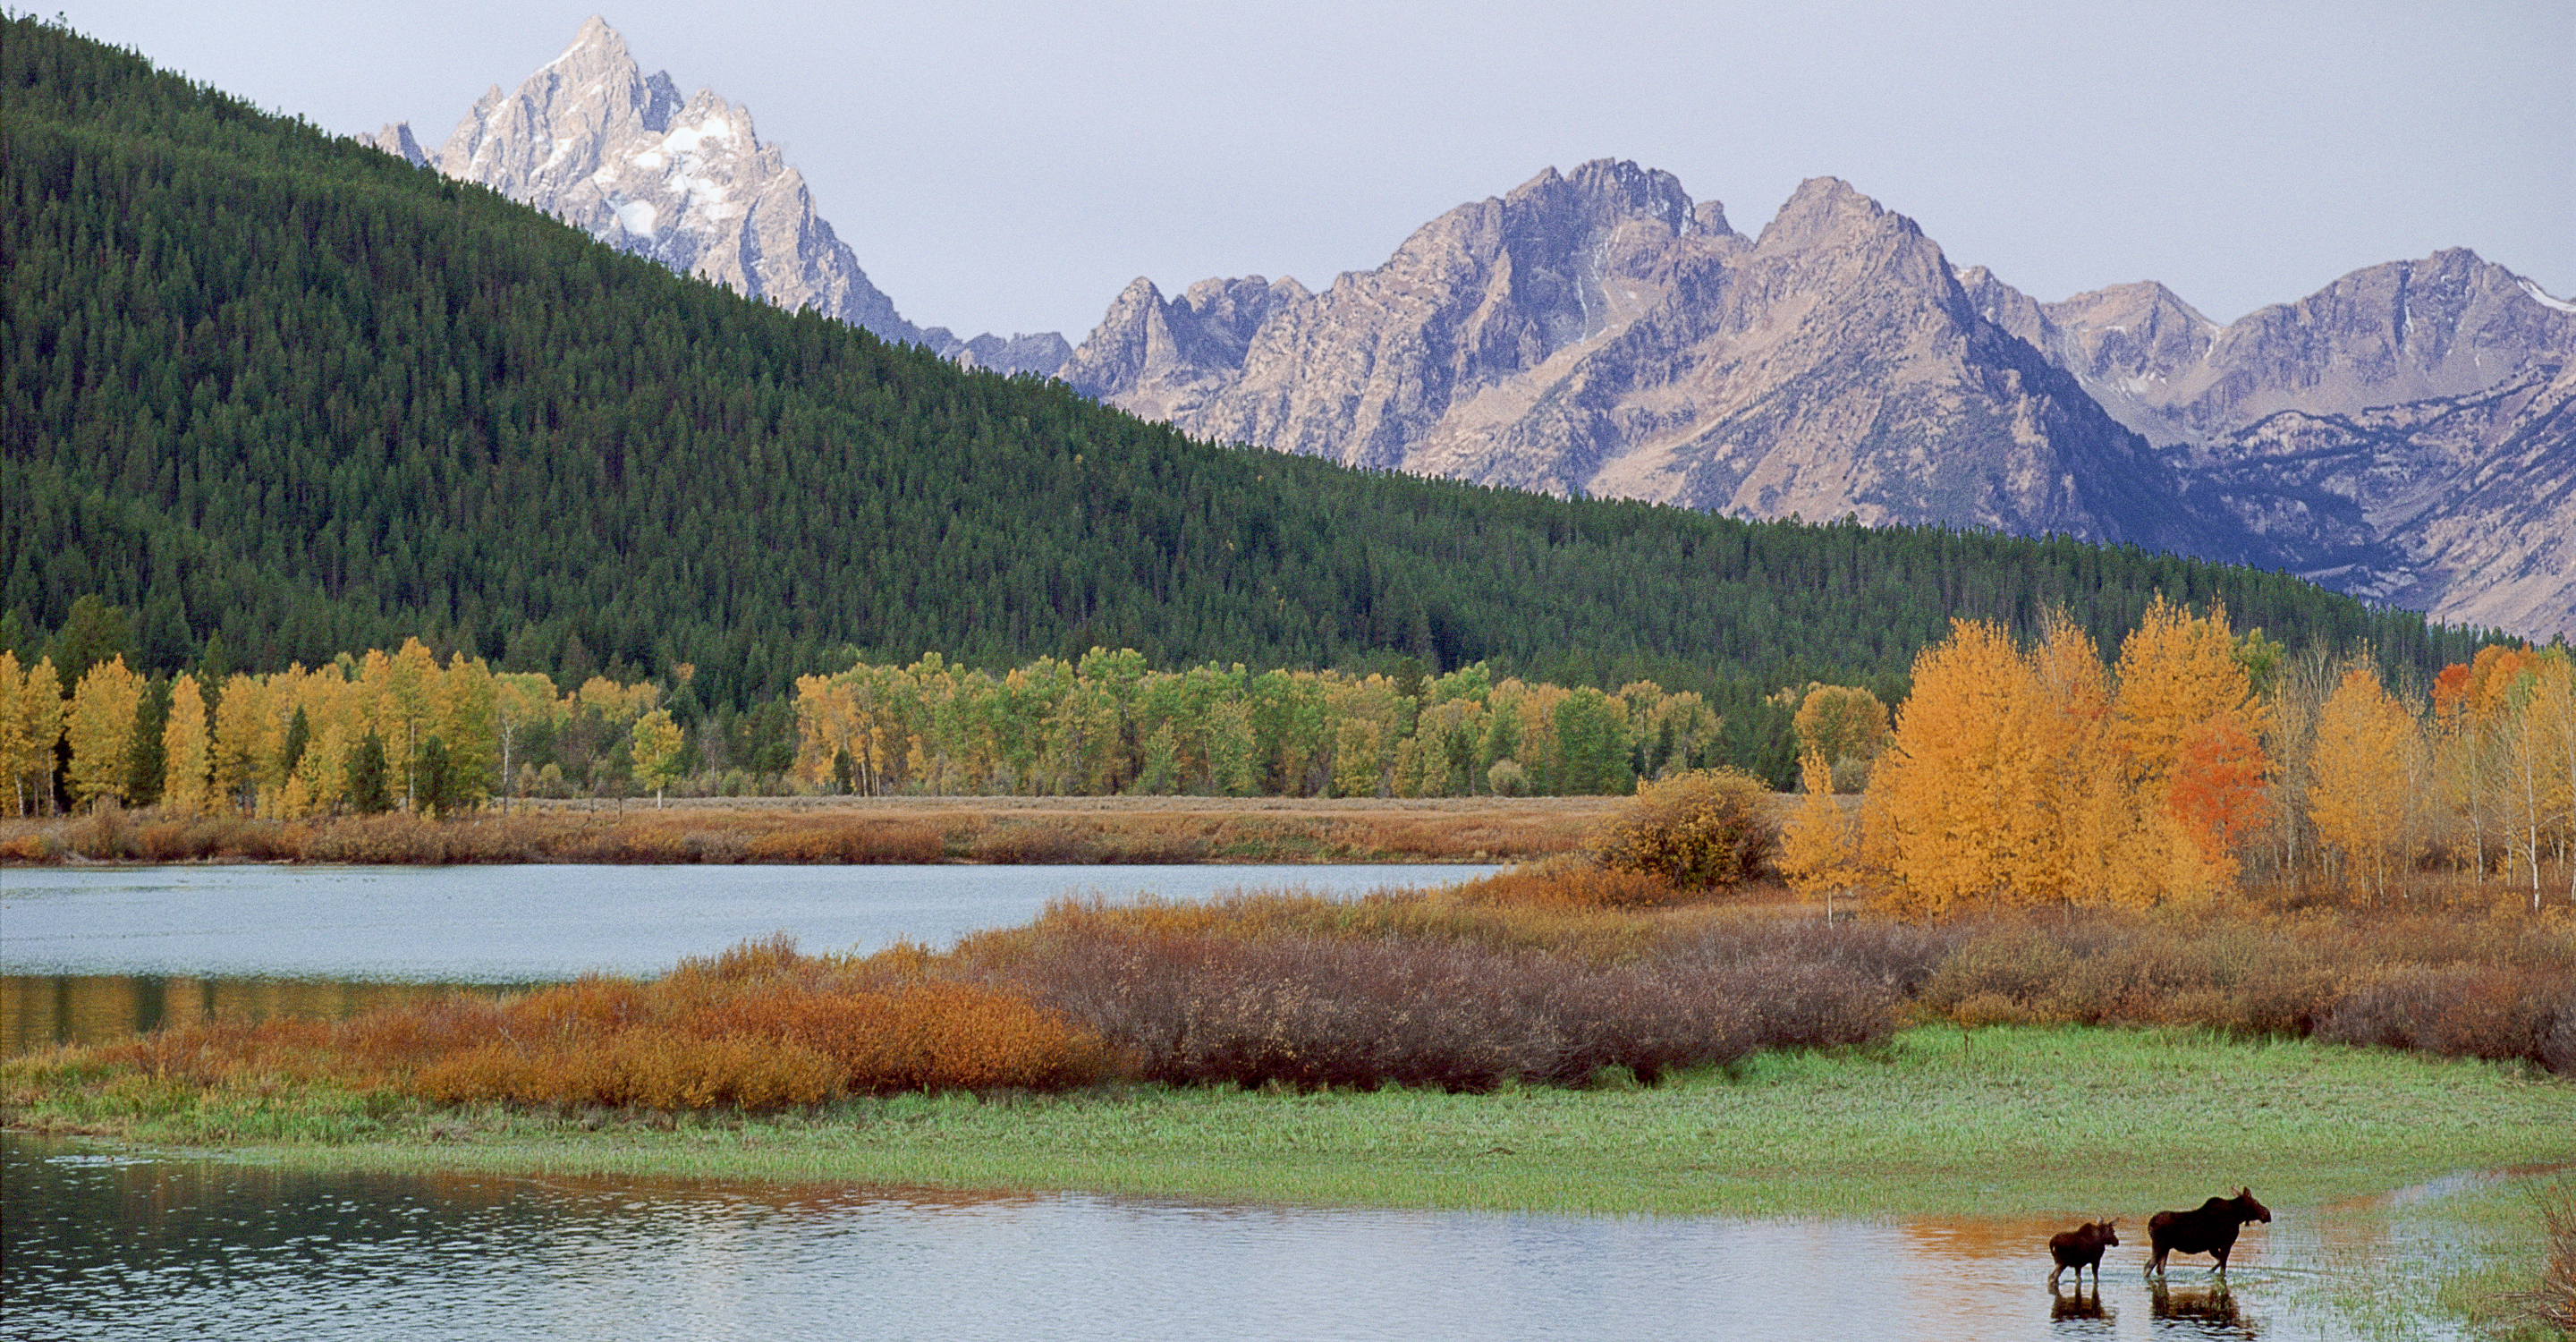 Landscape photo of the Snake River with a moose in the foreground, Yellowstone National Park, United States